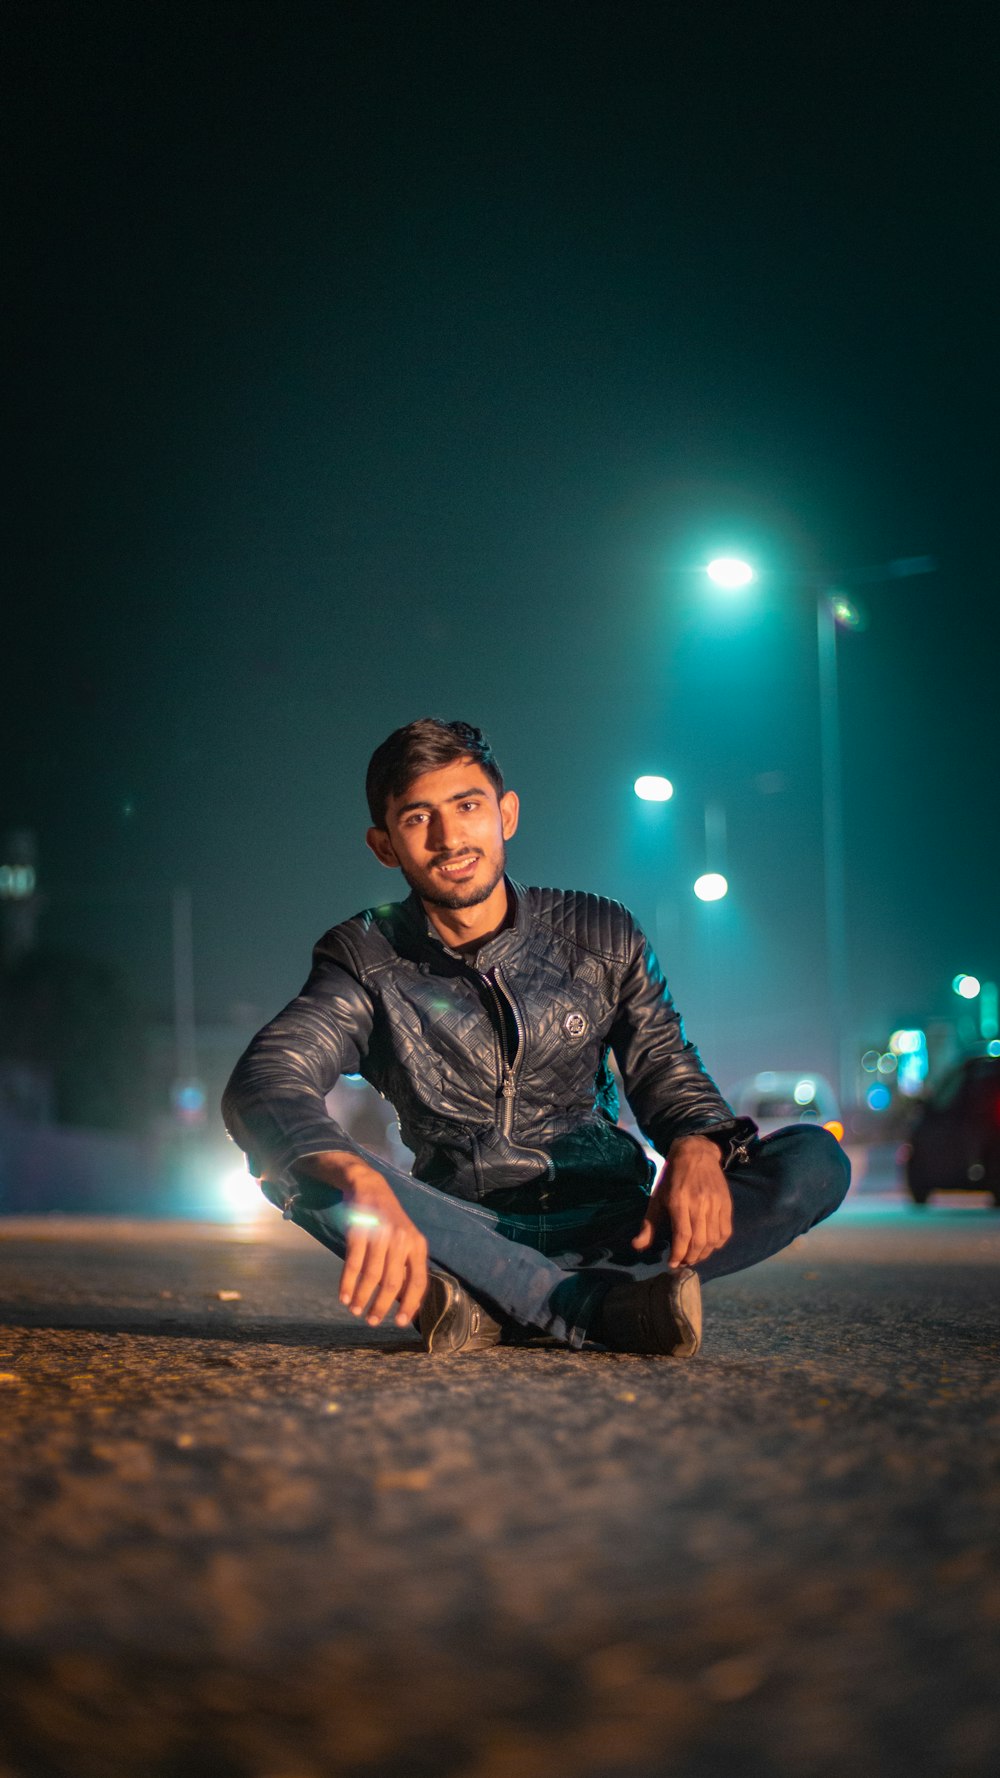 man in black leather jacket sitting on road during nighttime